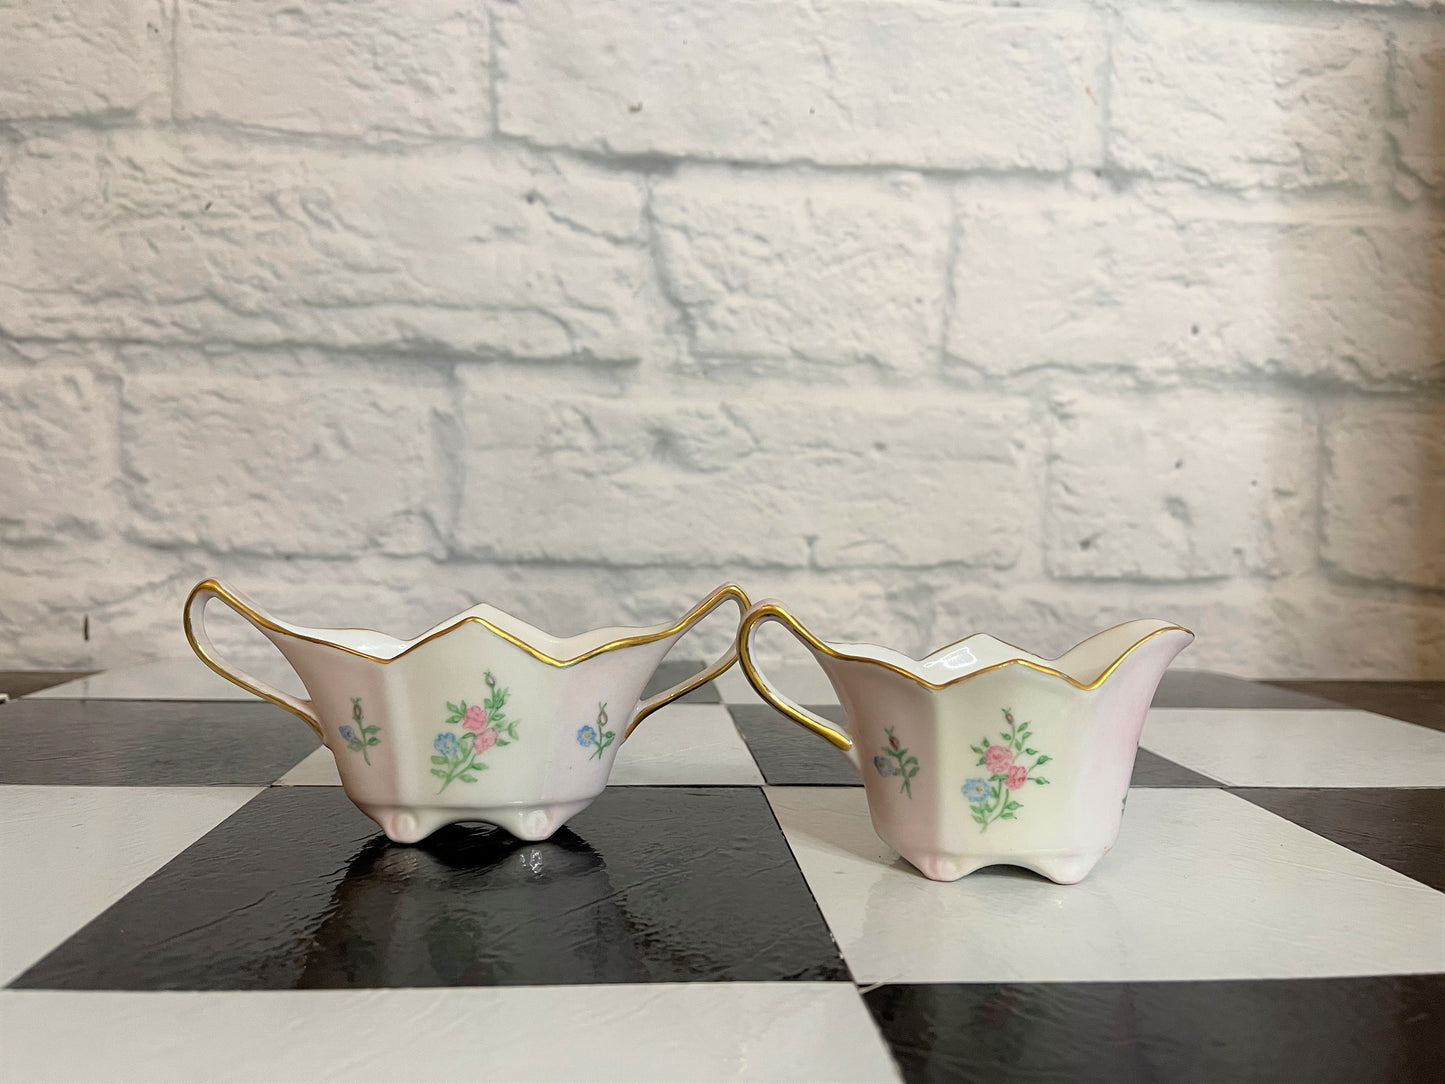 Pink and White Floral Creamer and Sugar Set - Vintage - Hand Painted